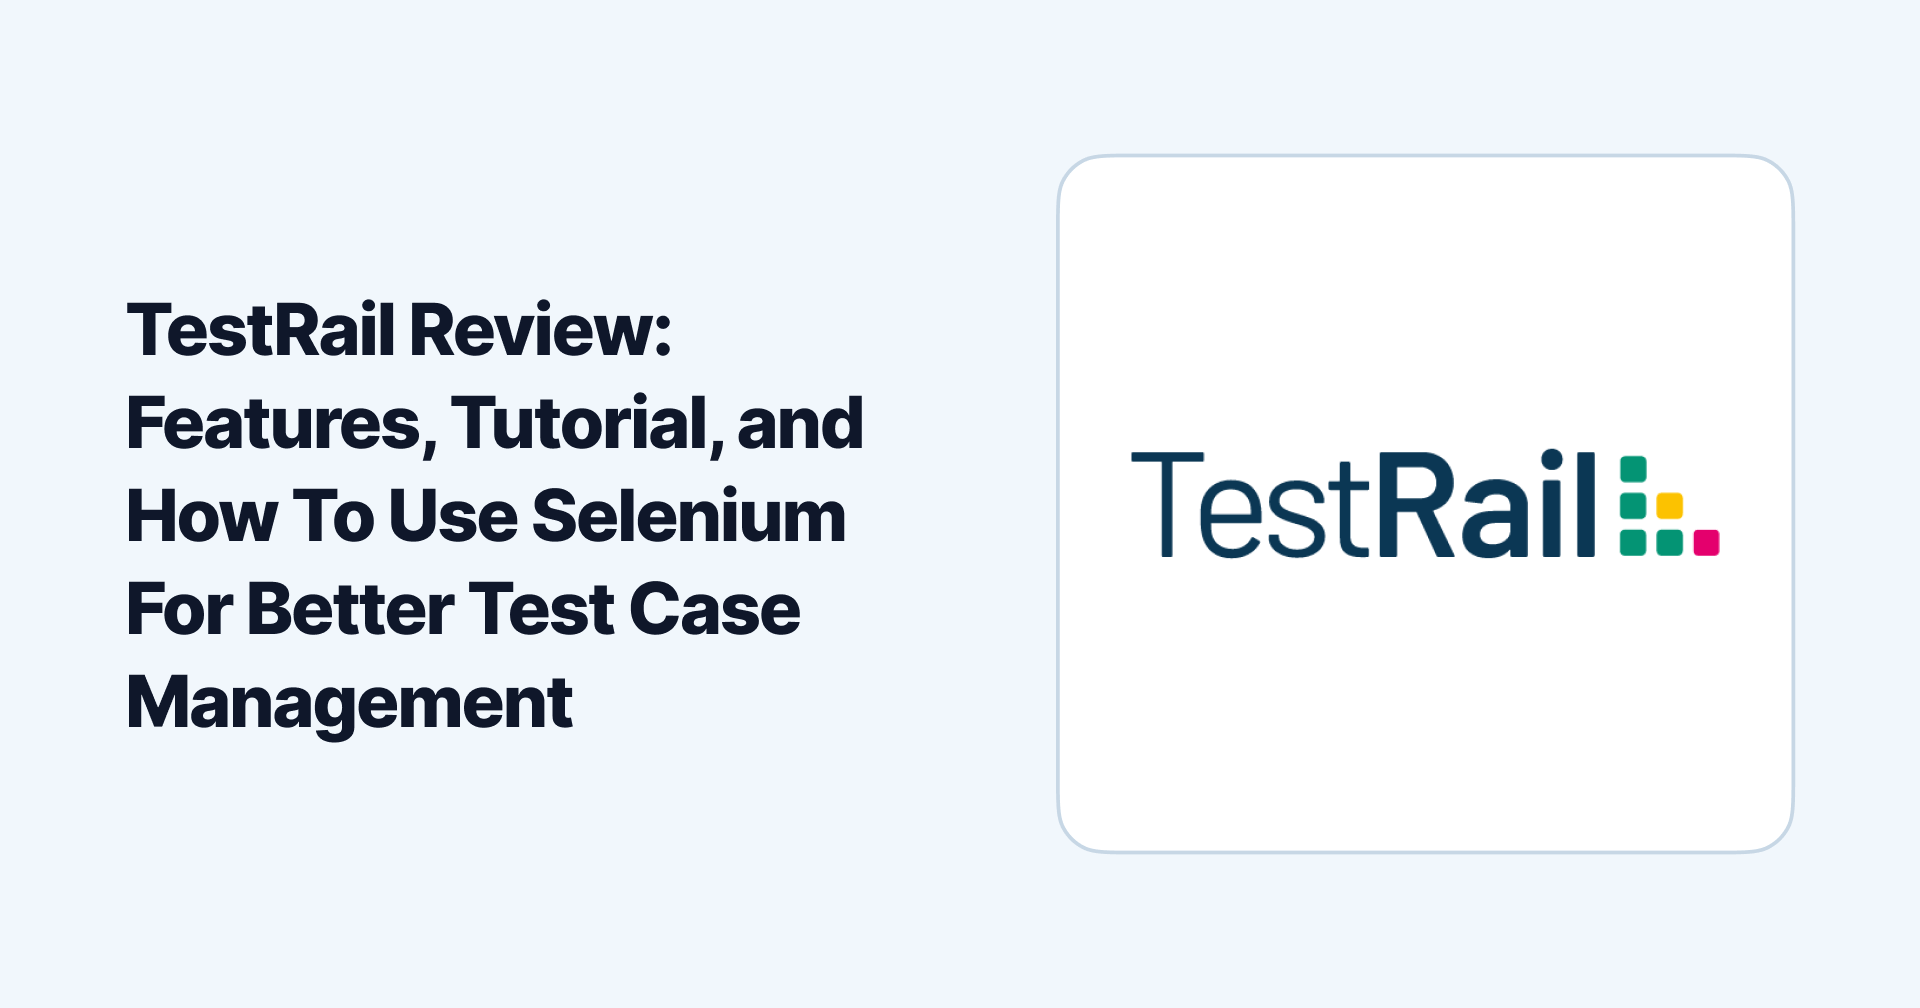 TestRail Review: Features, Tutorial, and How To Use Selenium For Better Test Case Management